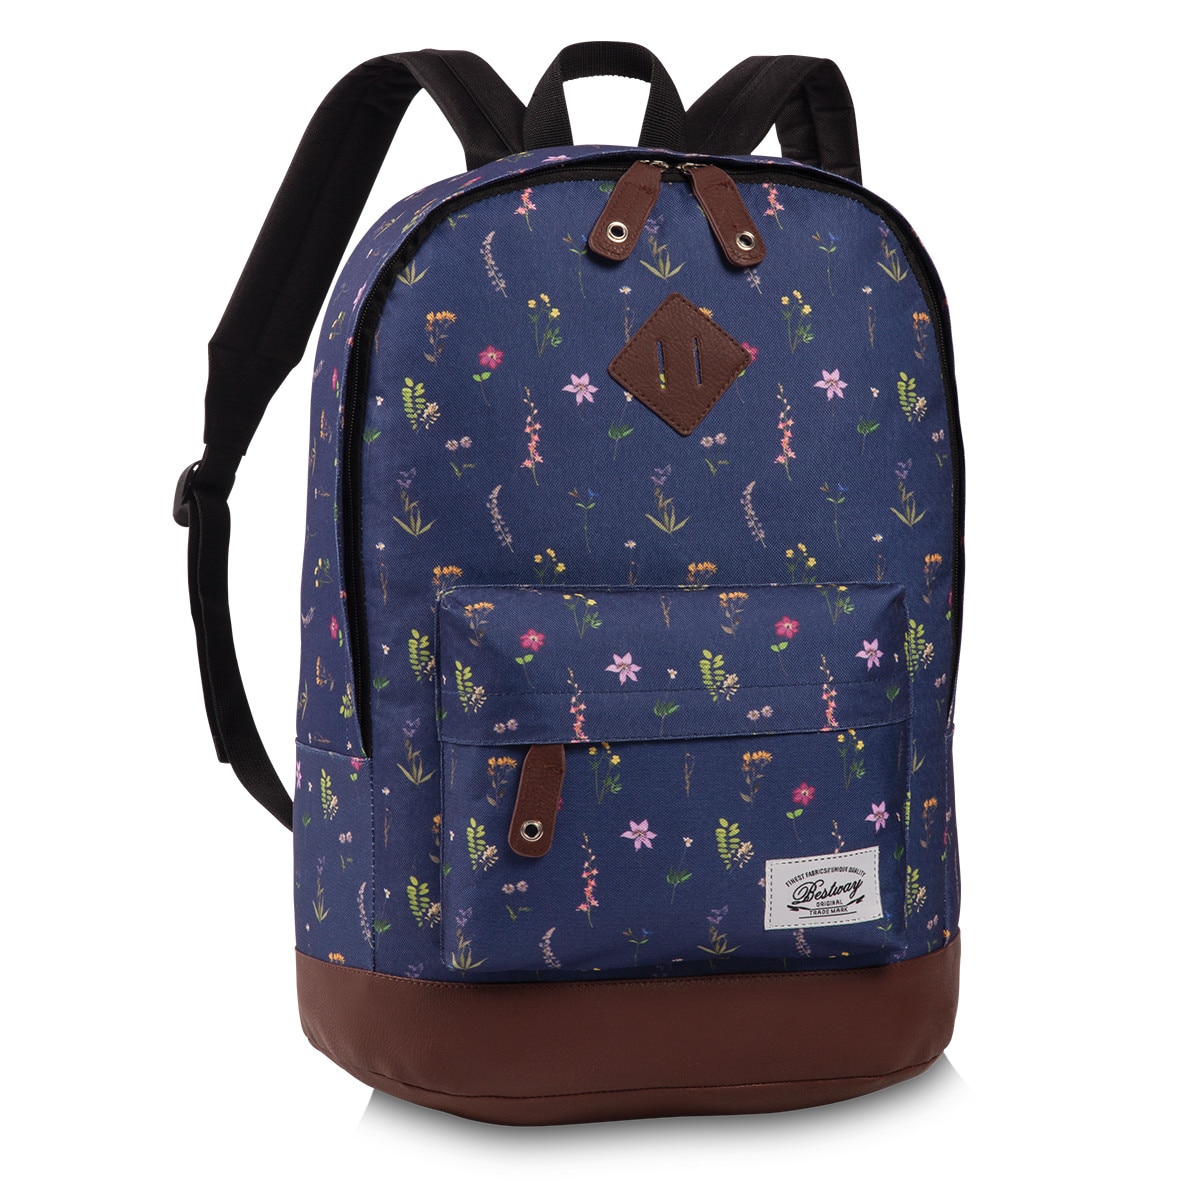 let down Waterfront tolerance Rucsac Casual, BESTWAY, CAMPUS TREND, F40190-0600, Multicolor - eMAG.ro